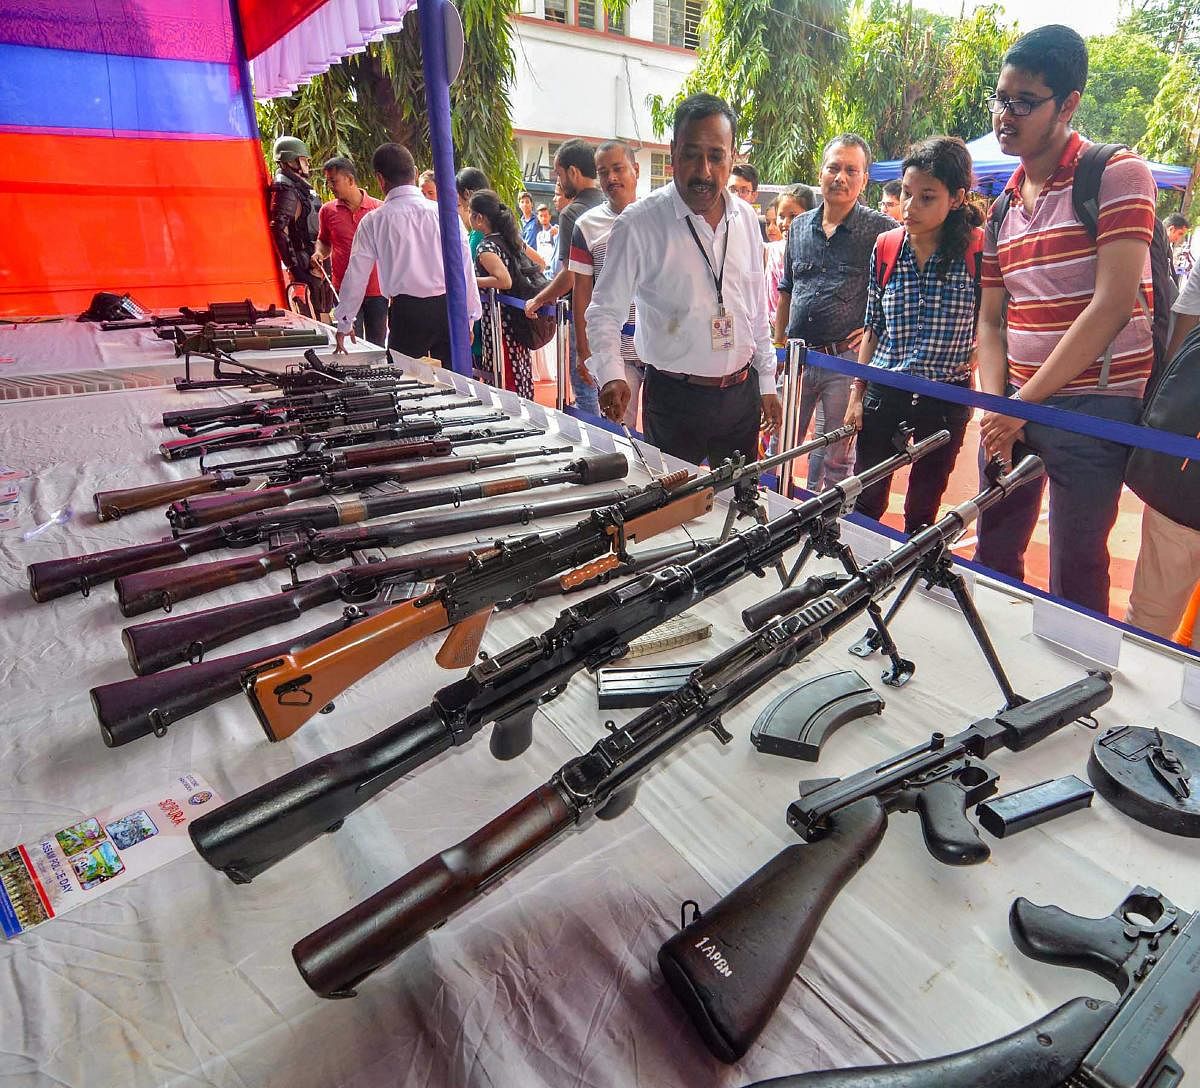 Students visit an arms stall during an exhibition to commemorate Assam Police Day, in Guwahati, Friday, Sept 28, 2018. (PTI Photo)